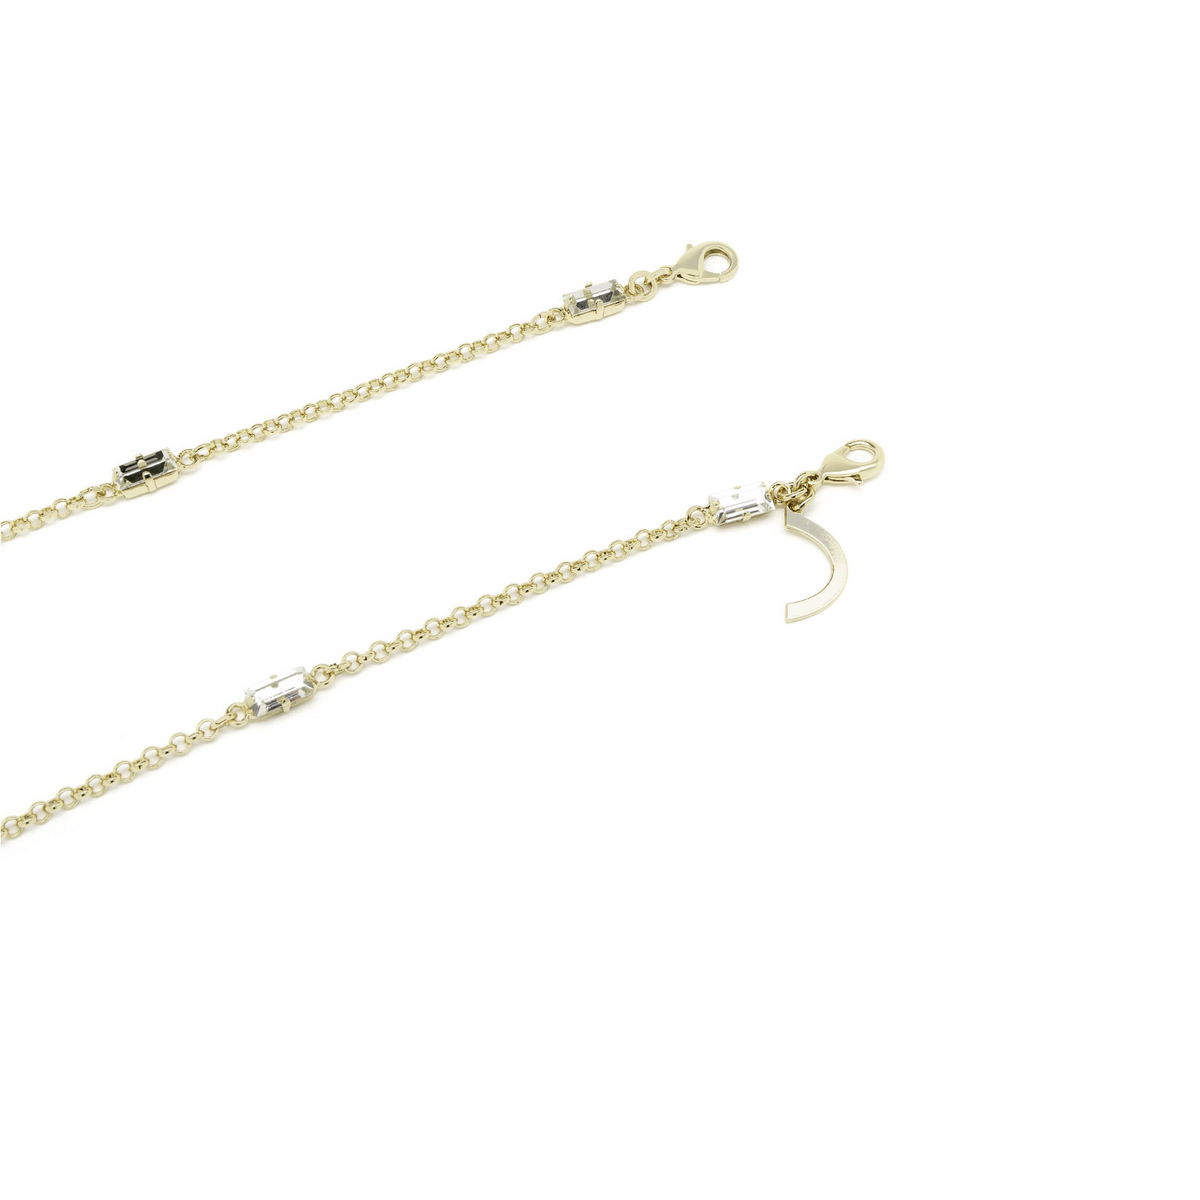 Huma® Accessories: Baguette Strass Chain color Gold S05 - product thumbnail 1/3.